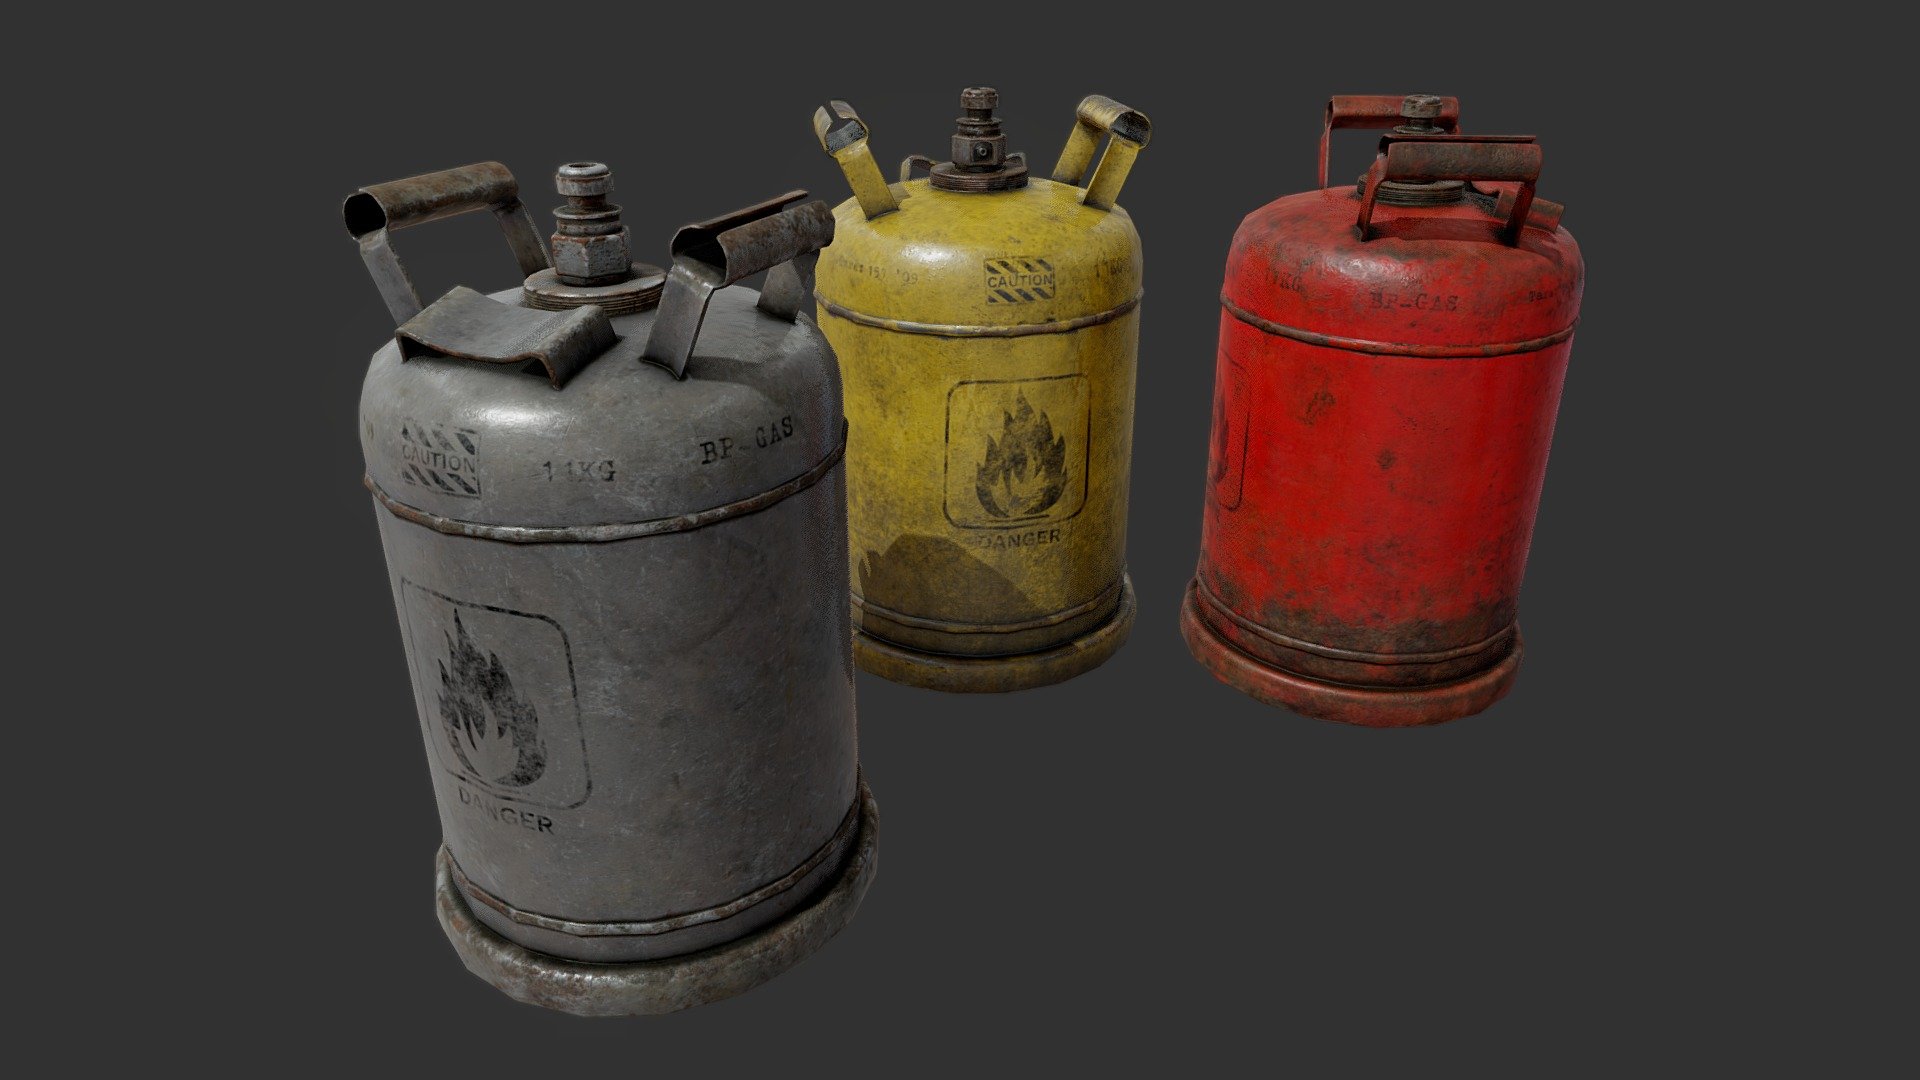 Propane Gas Cylinder PBR

Very Detailed Low Poly Propane Gas Cylinder with High-Quality PBR Texturing and 3 color variations

Fits perfect for any PBR game as Decoration or a Tool, or Explosive. 

The Mesh is unwrapped, and UV Mapped PBR Painted 

Standard Textures
Base Color, Metallic, Roughness, Height, AO, Normal, Maps

Unreal 4 Textures
Base Color, Normal, OcclusionRoughnessMetallic

Unity 5/2017 Textures
Albedo, SpecularSmoothness, Normal, and AO Maps

4096x4096 TGA Textures

Please Note, this PBR Textures Only. 

Low Poly Triangles 

5786 Tris
2955 Verts

File Formats :

.Max2018
.Max2017
.Max2016
.Max2015
.FBX
.OBJ
.3DS
.DAE - Propane Gas Cylinders PBR - Buy Royalty Free 3D model by GamePoly (@triix3d) 3d model